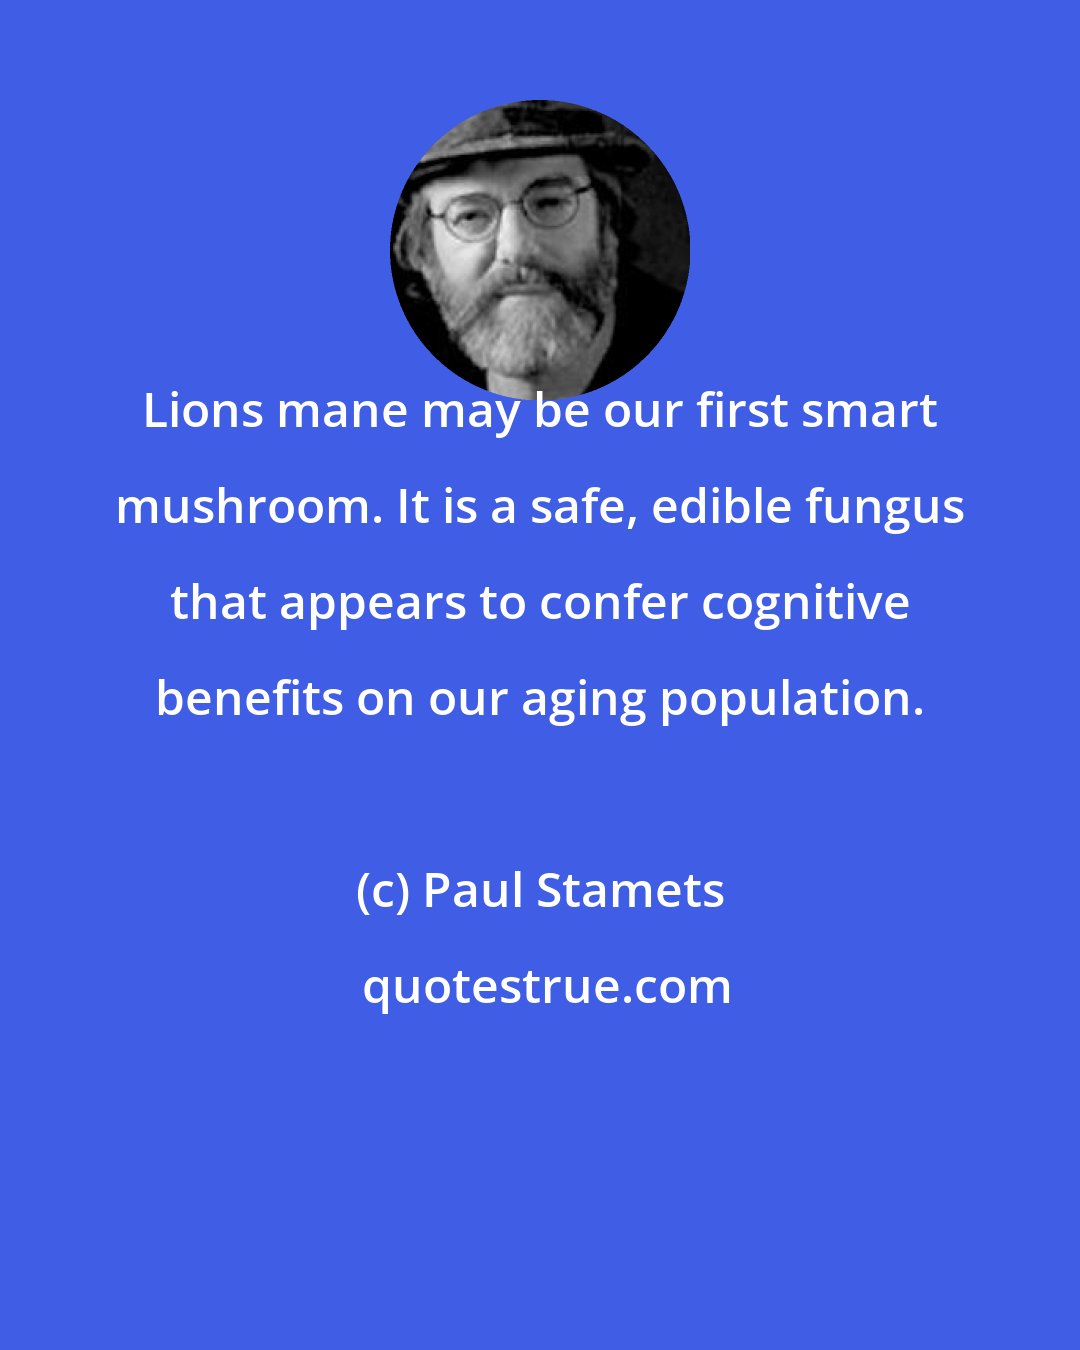 Paul Stamets: Lions mane may be our first smart mushroom. It is a safe, edible fungus that appears to confer cognitive benefits on our aging population.